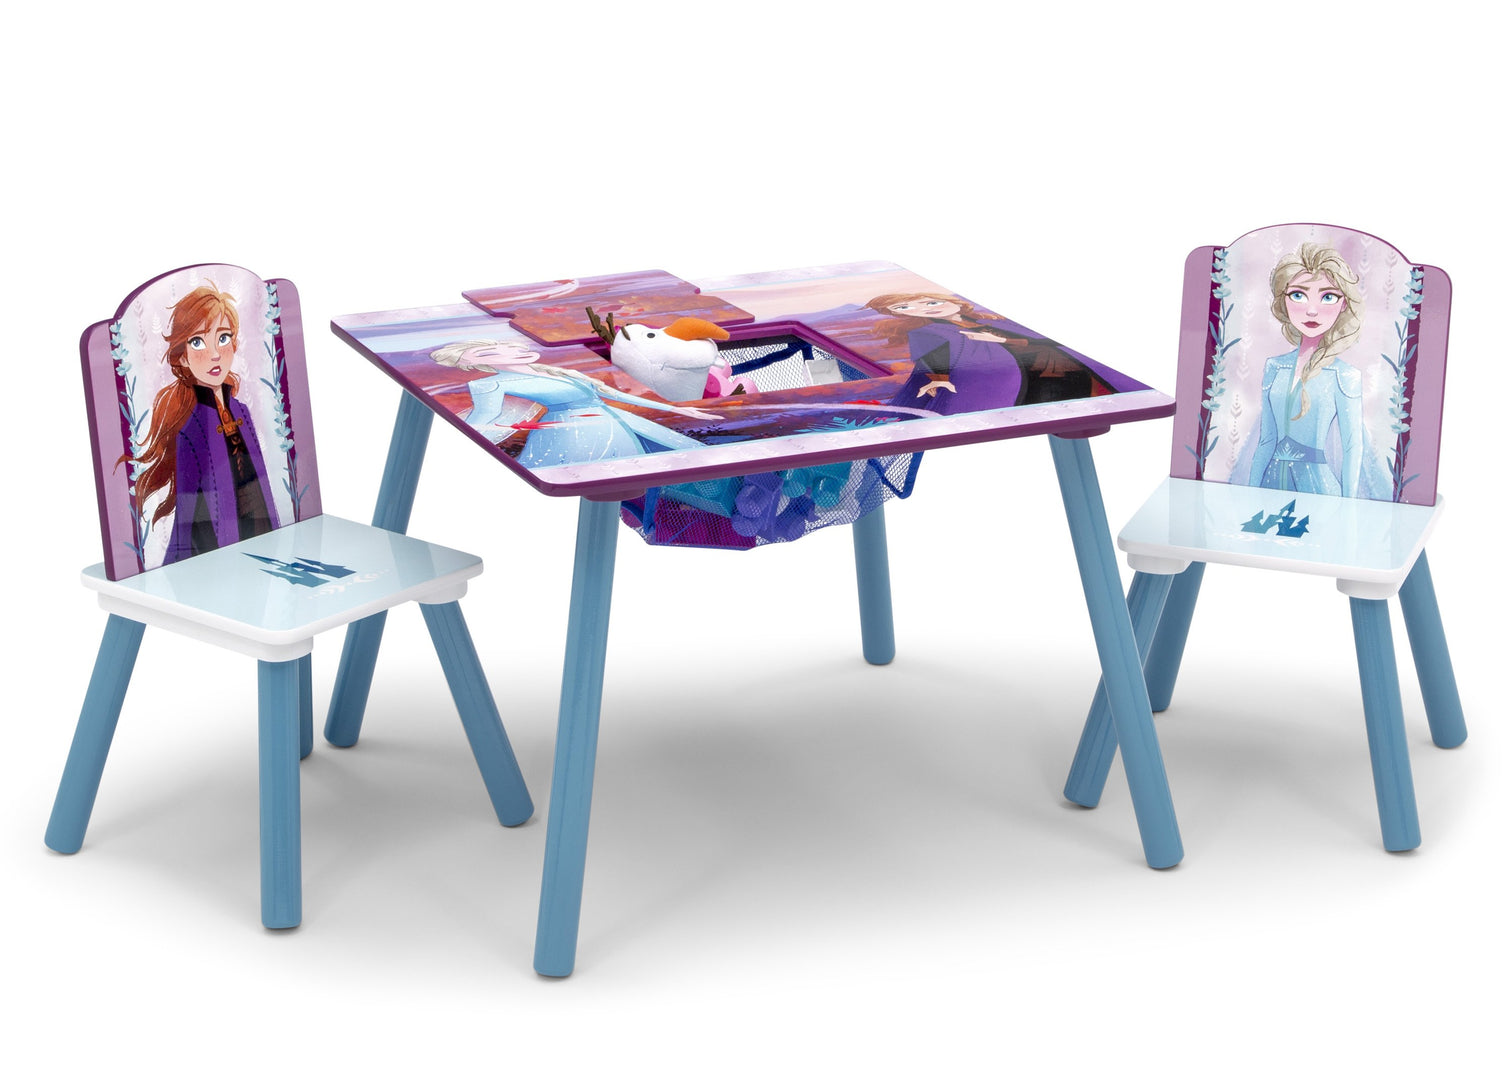 The Best Kids Craft Table & Kids Art Table You Can Buy in 2023